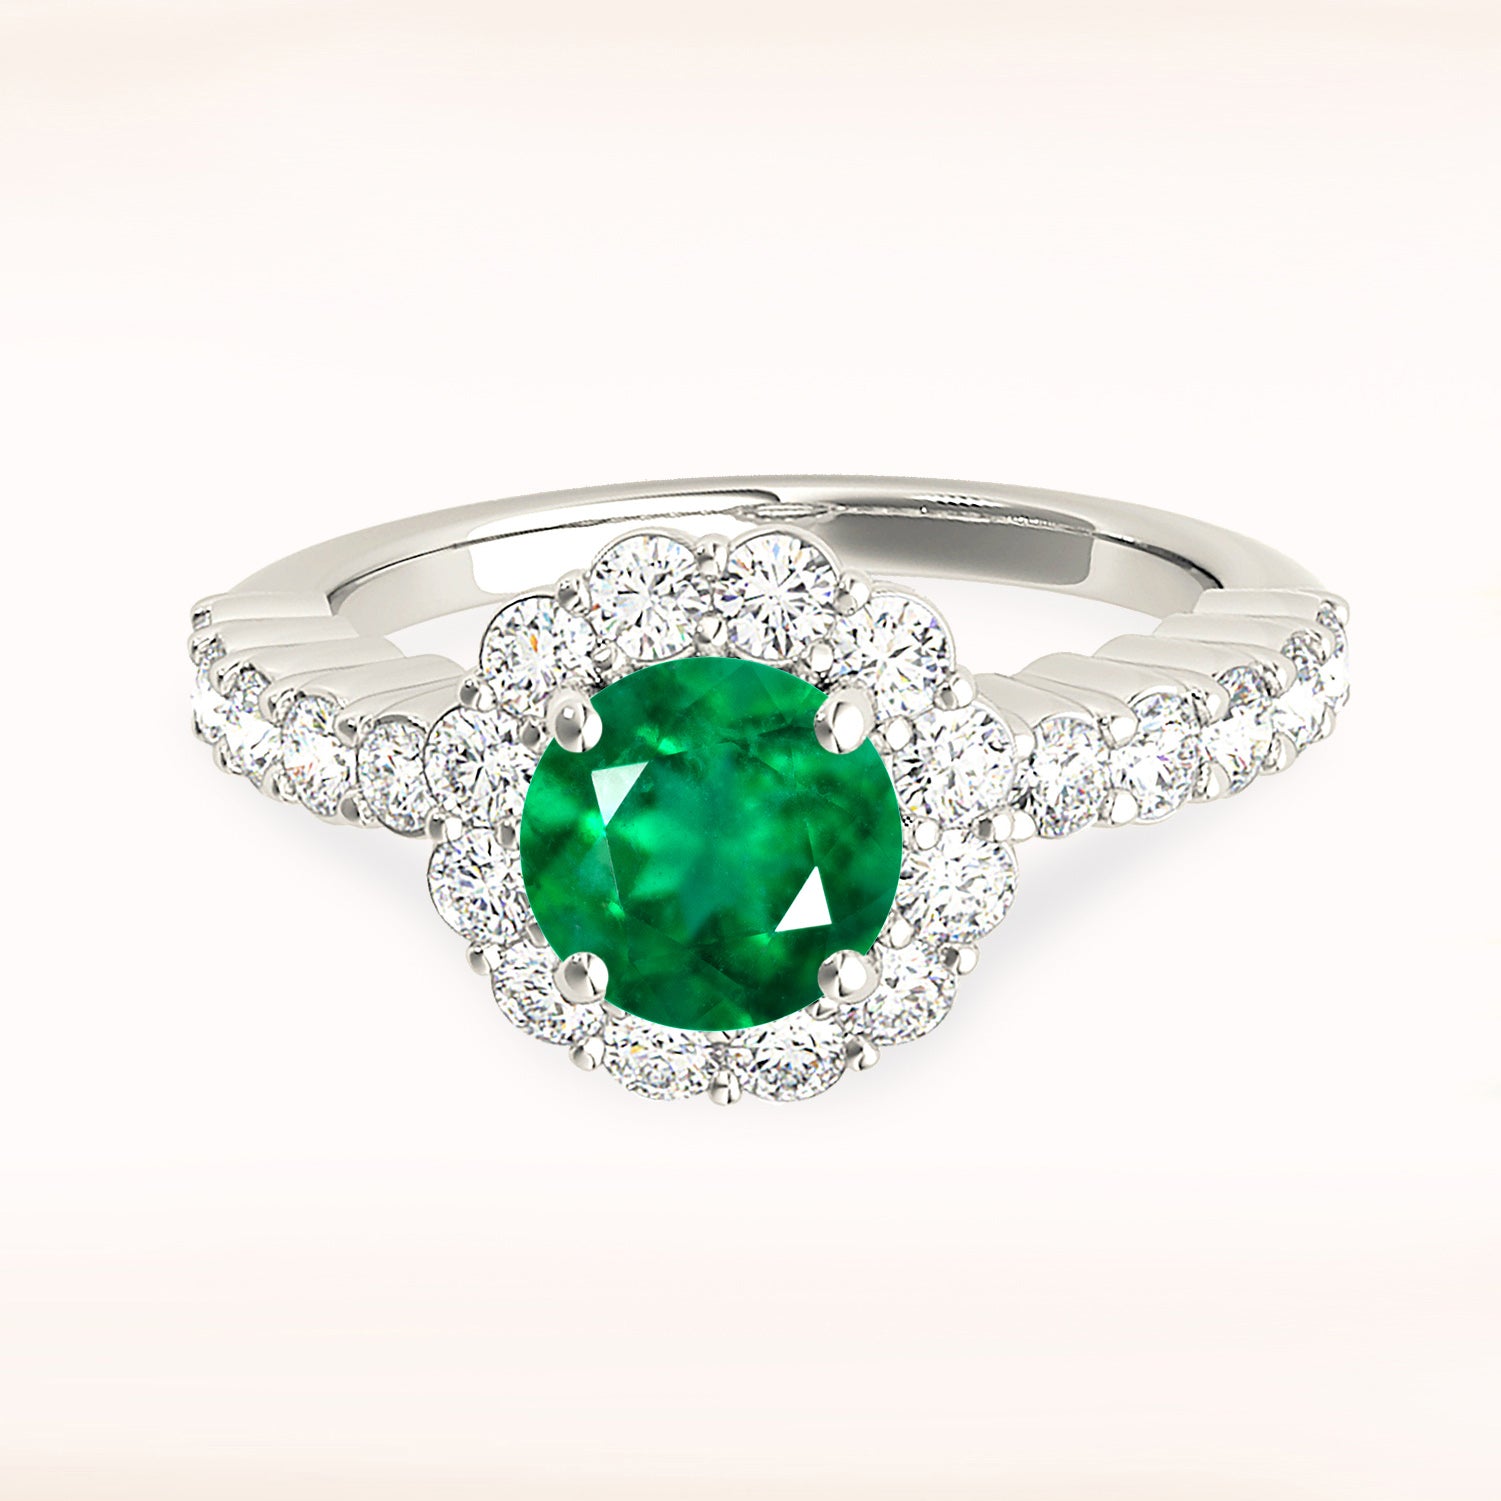 1.14 ct. Genuine Emerald Ring With 0.70 ctw. Diamond Halo And Scalloped Diamond Band-in 14K/18K White, Yellow, Rose Gold and Platinum - Christmas Jewelry Gift -VIRABYANI